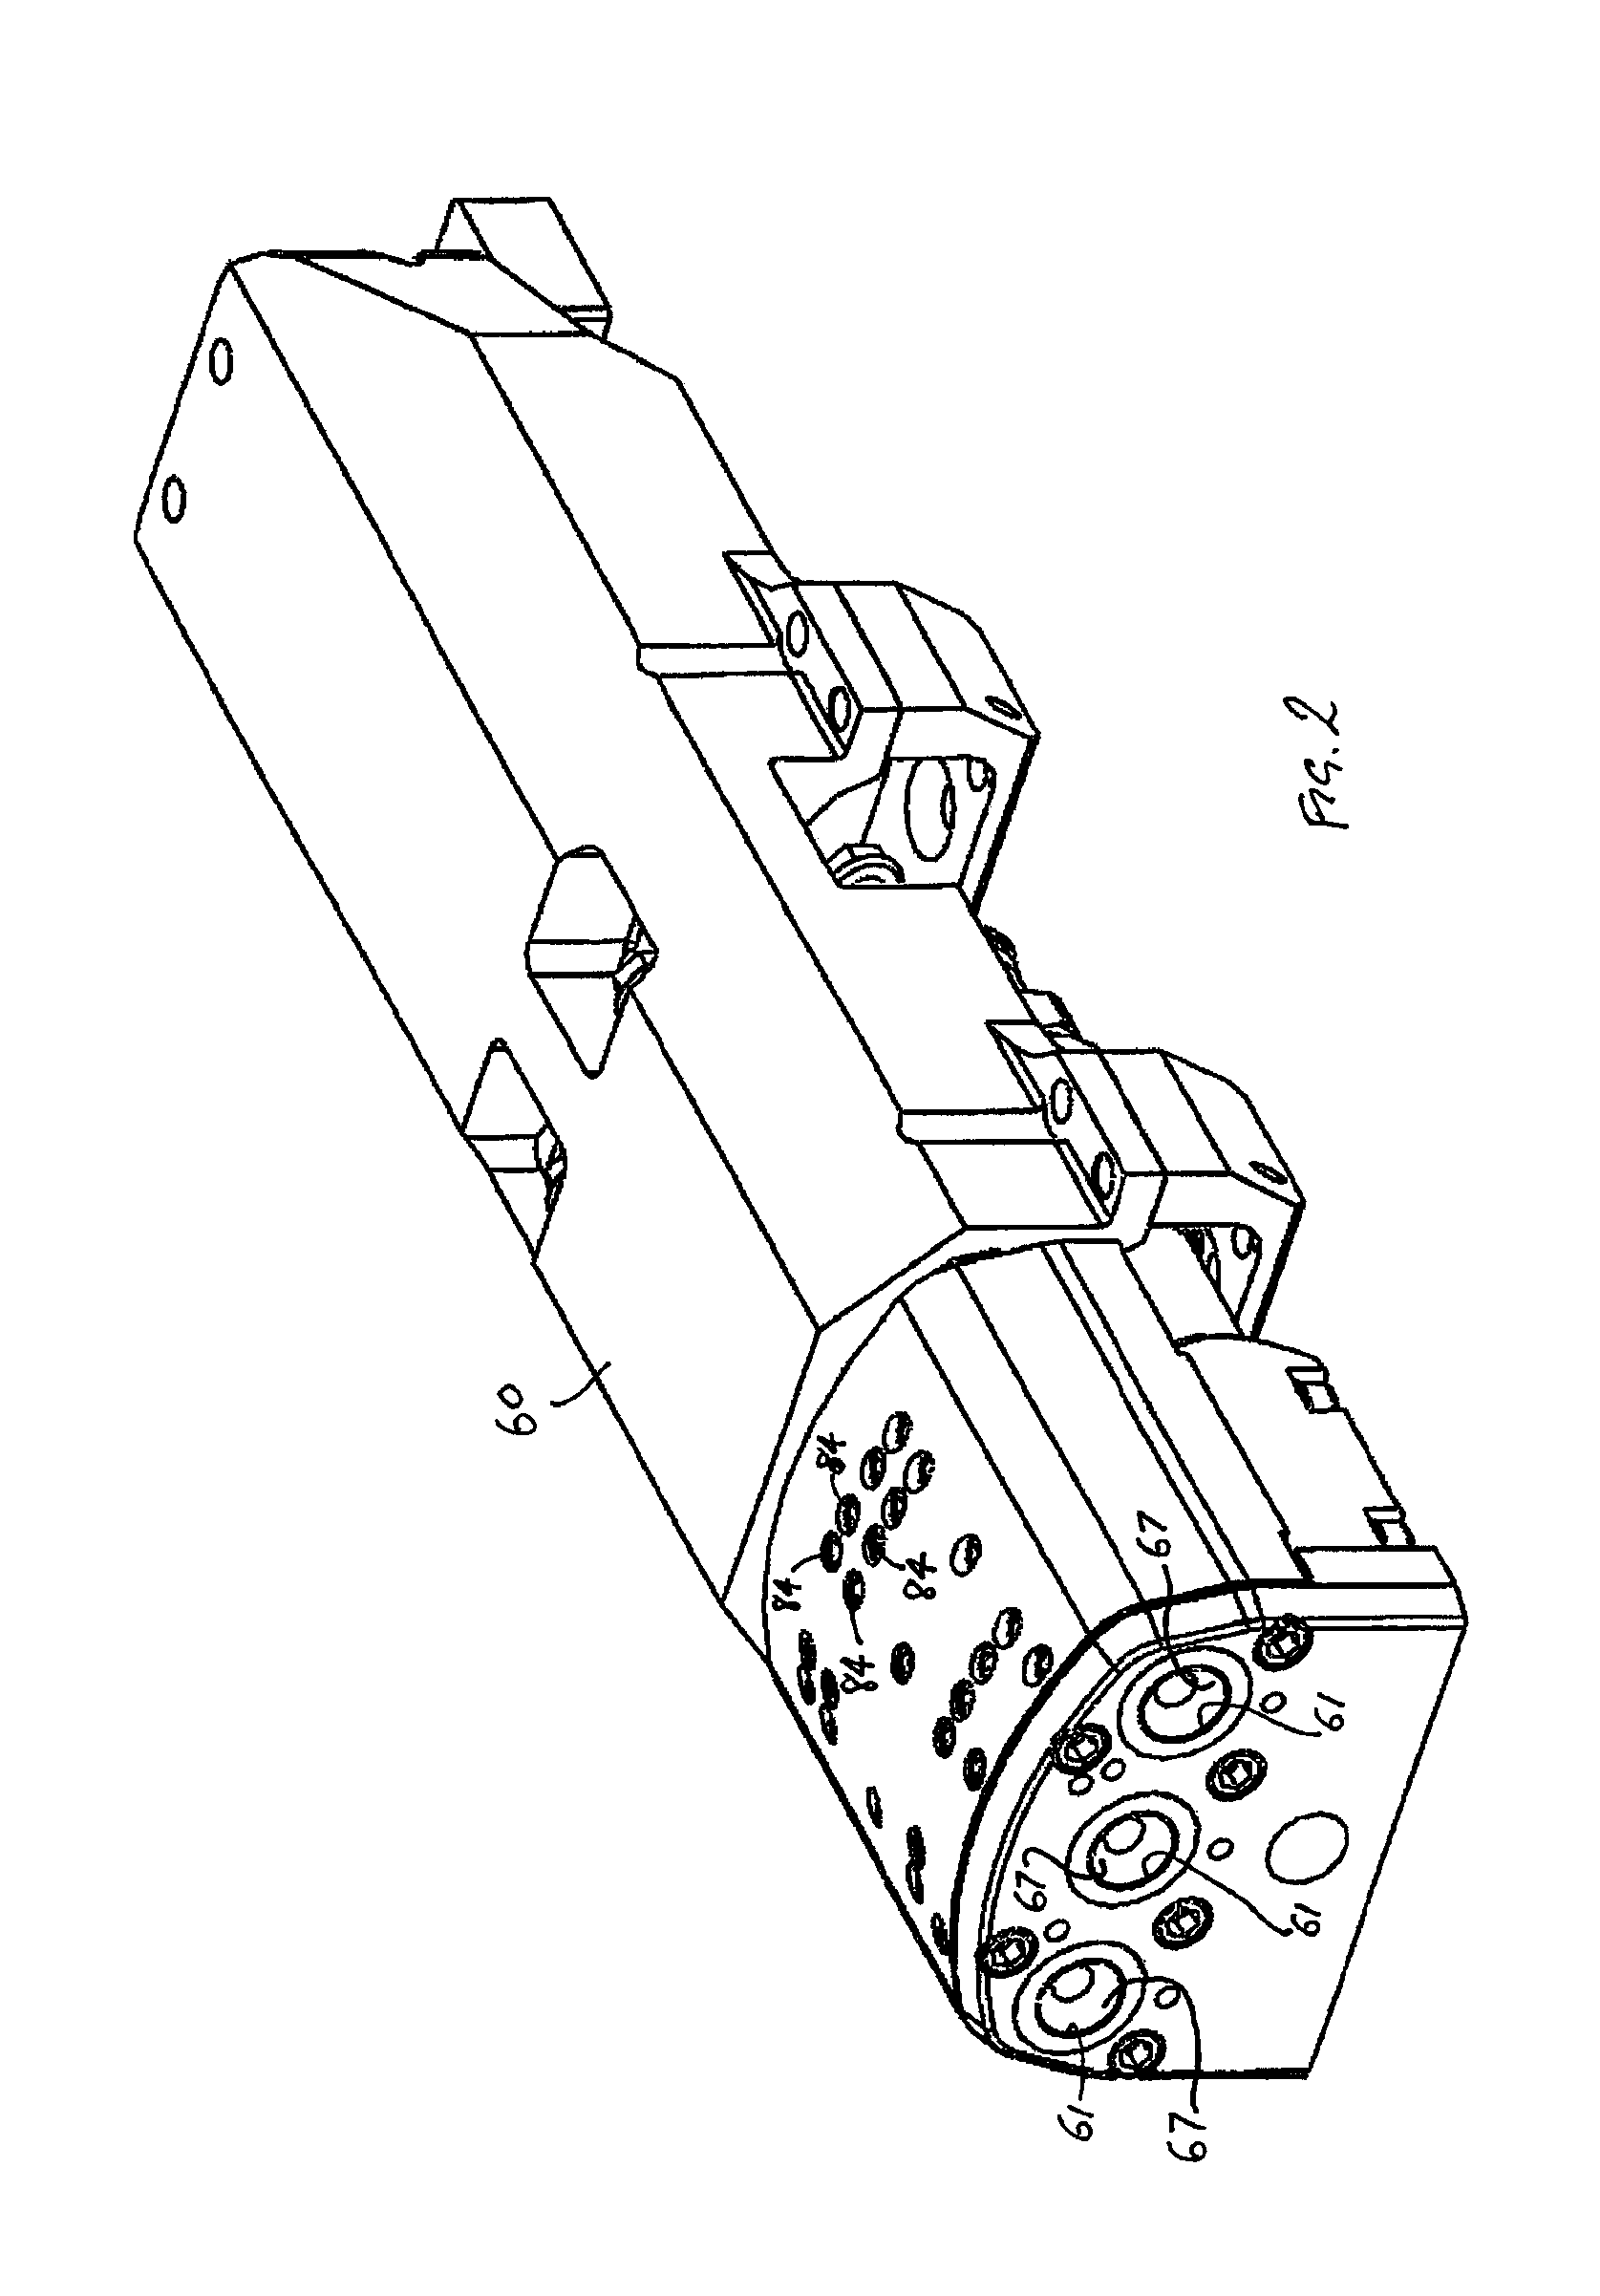 Downhole Electrical Wet Connector